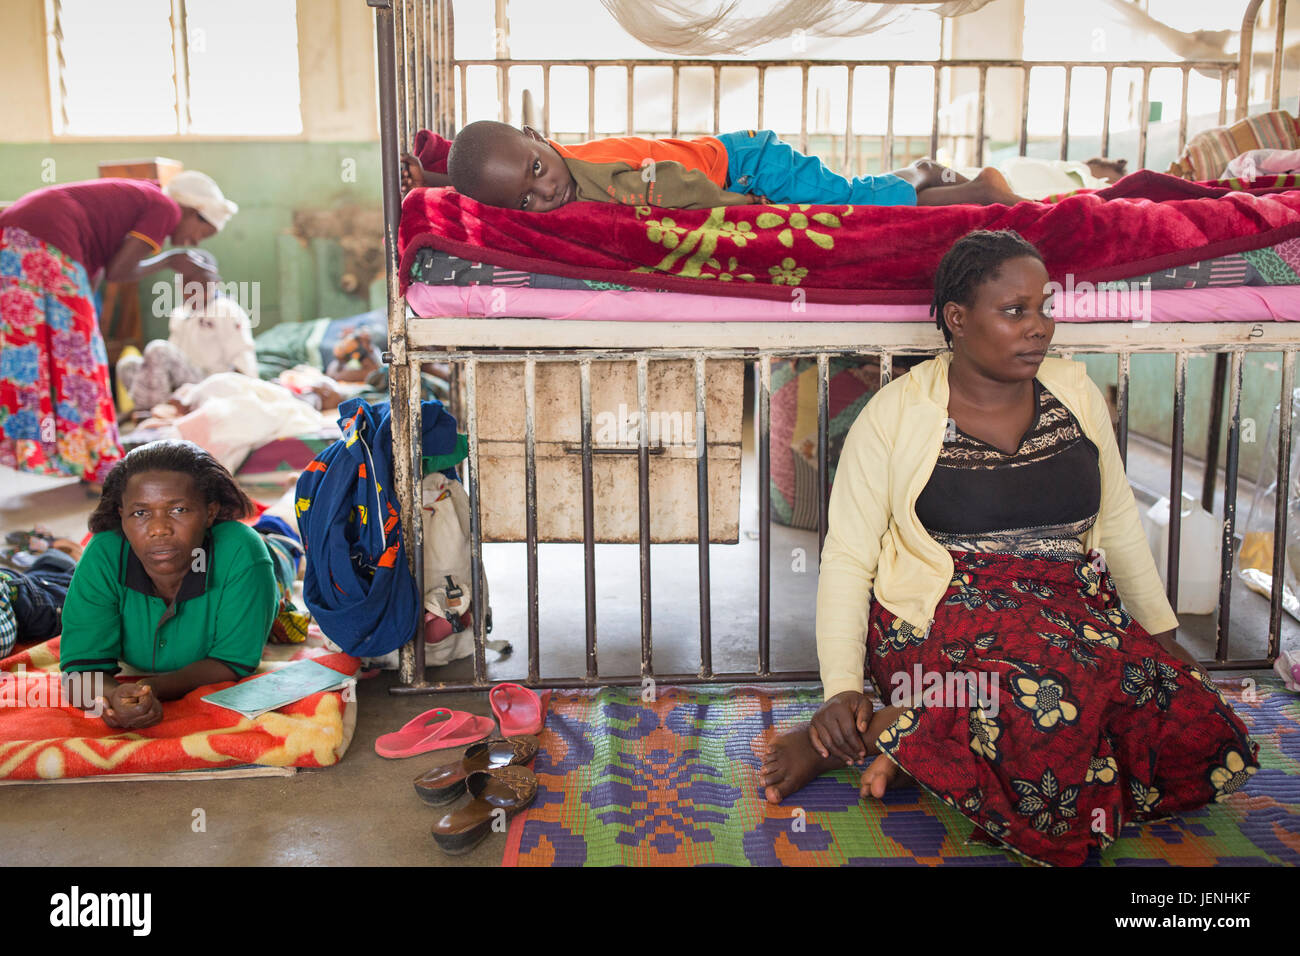 Patients rest on the wards of an underserved hospital in Bundibugyo, Uganda. Stock Photo